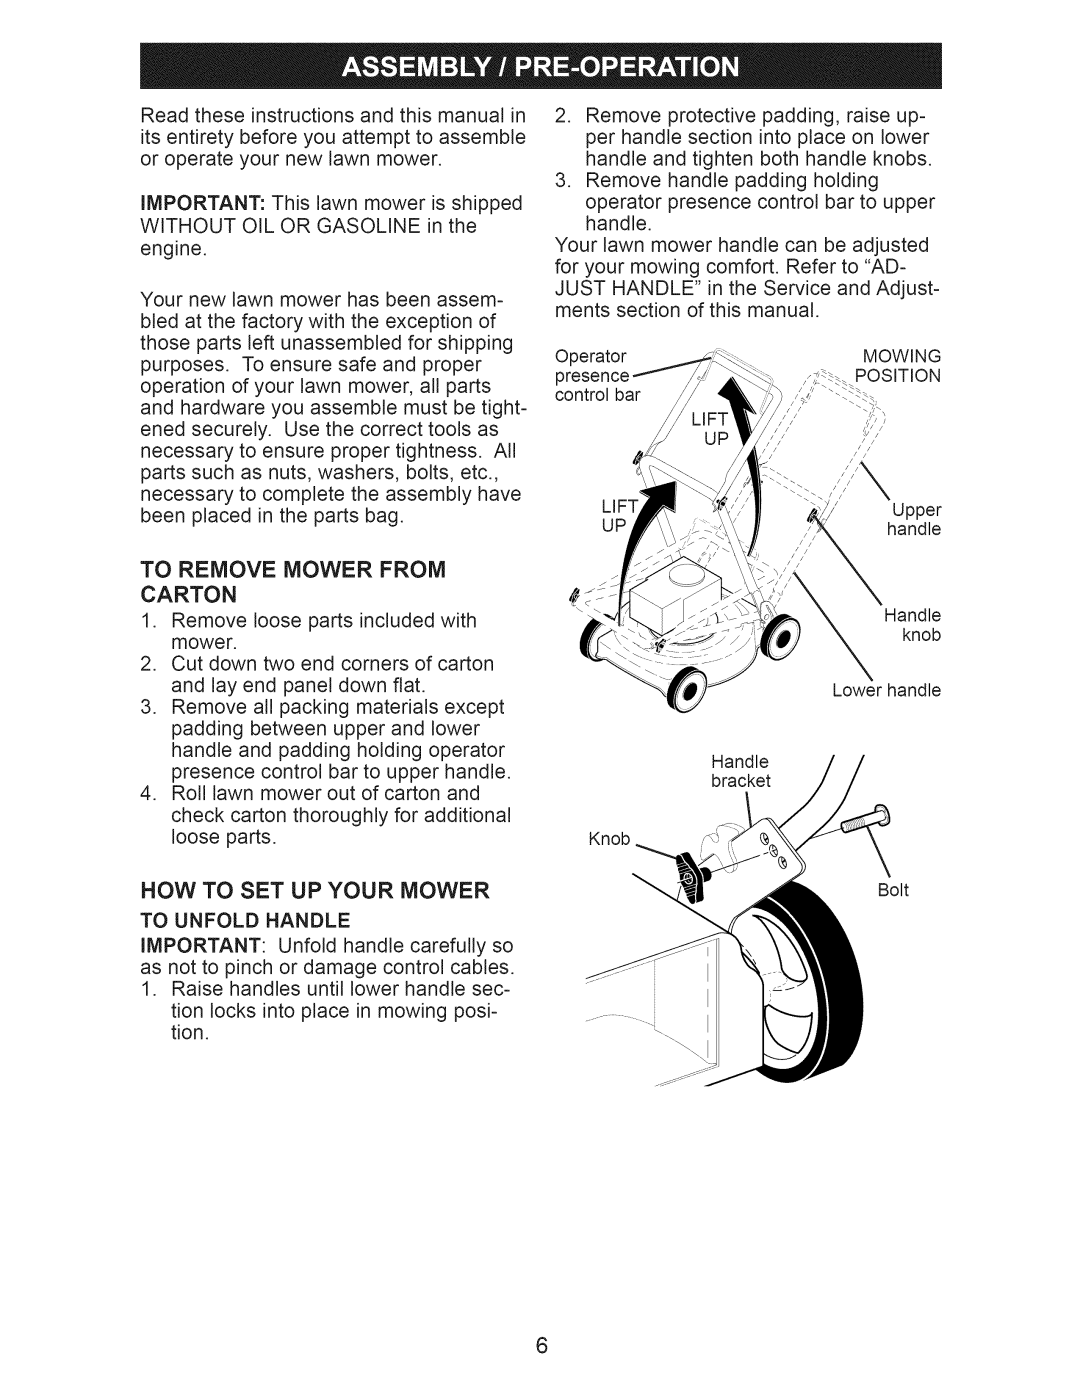 Craftsman 917.374060 owner manual Now To Set Up Your Mower, To Remove Mower From Carton 